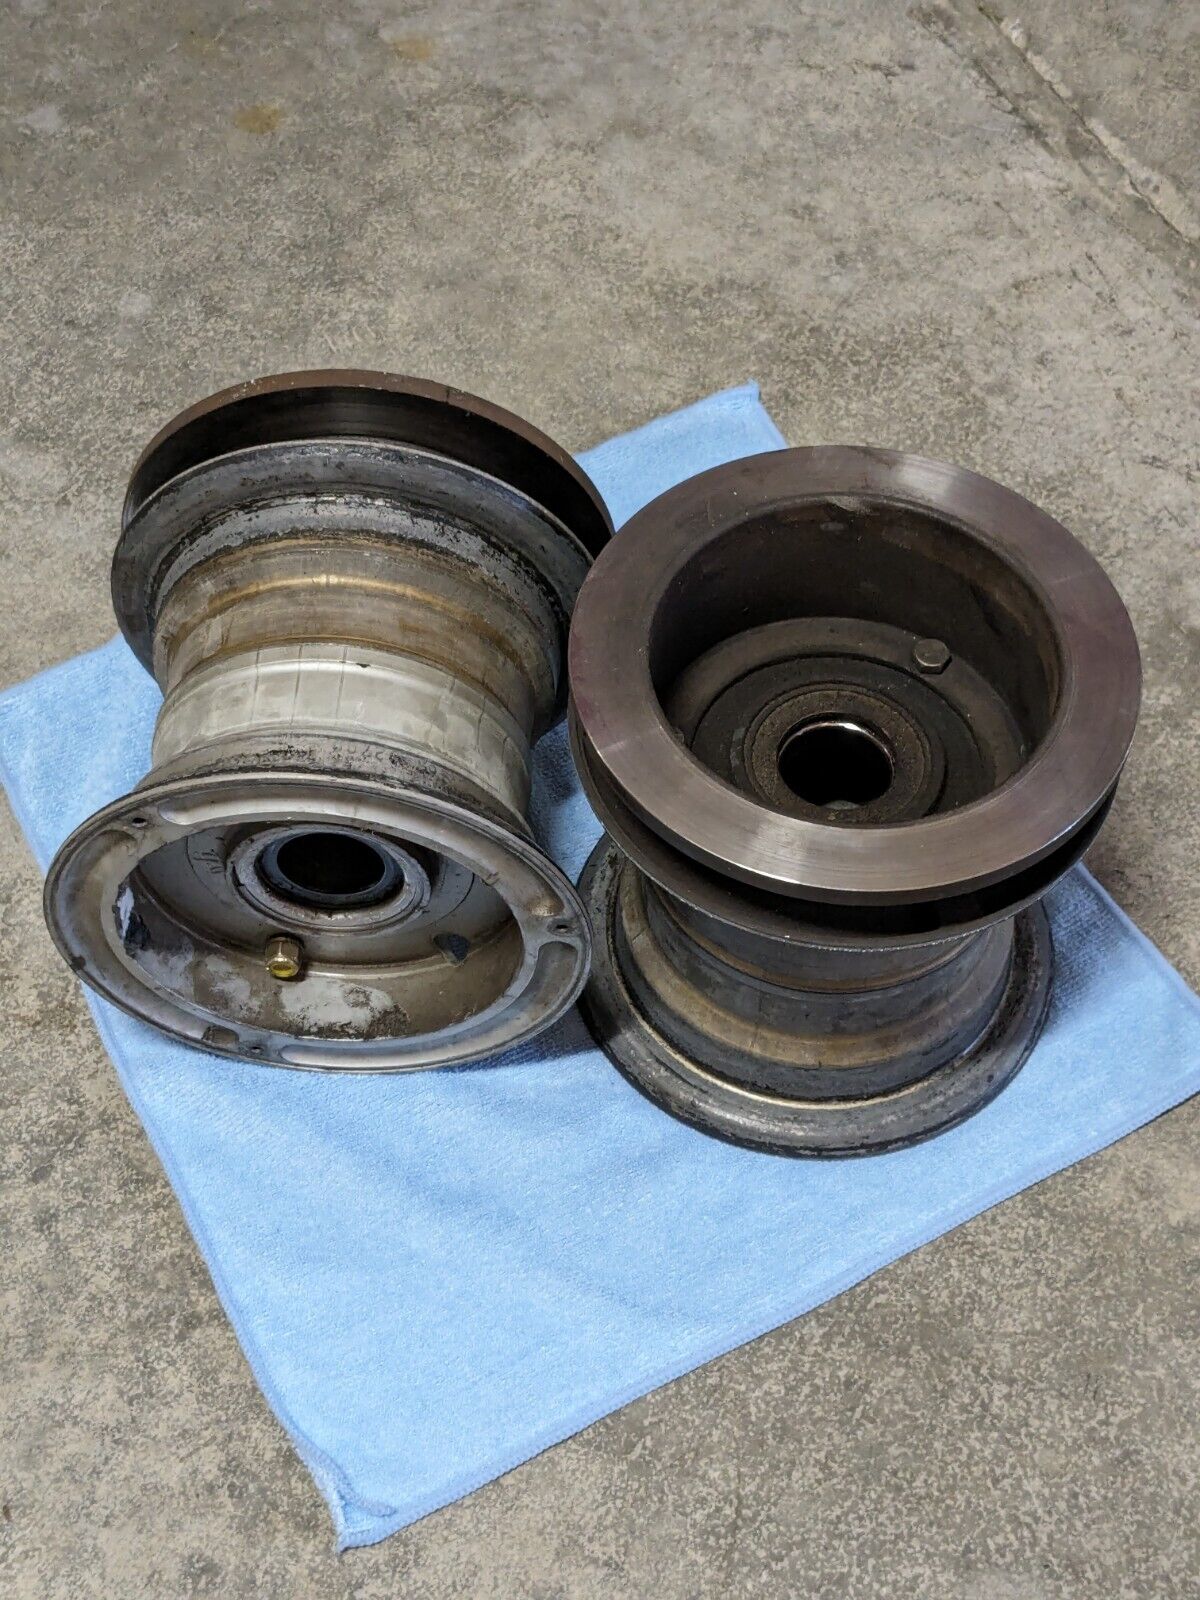 Main Wheels 6.00-6 & Cleveland Rotors removed from Cessna 180 for upgrade